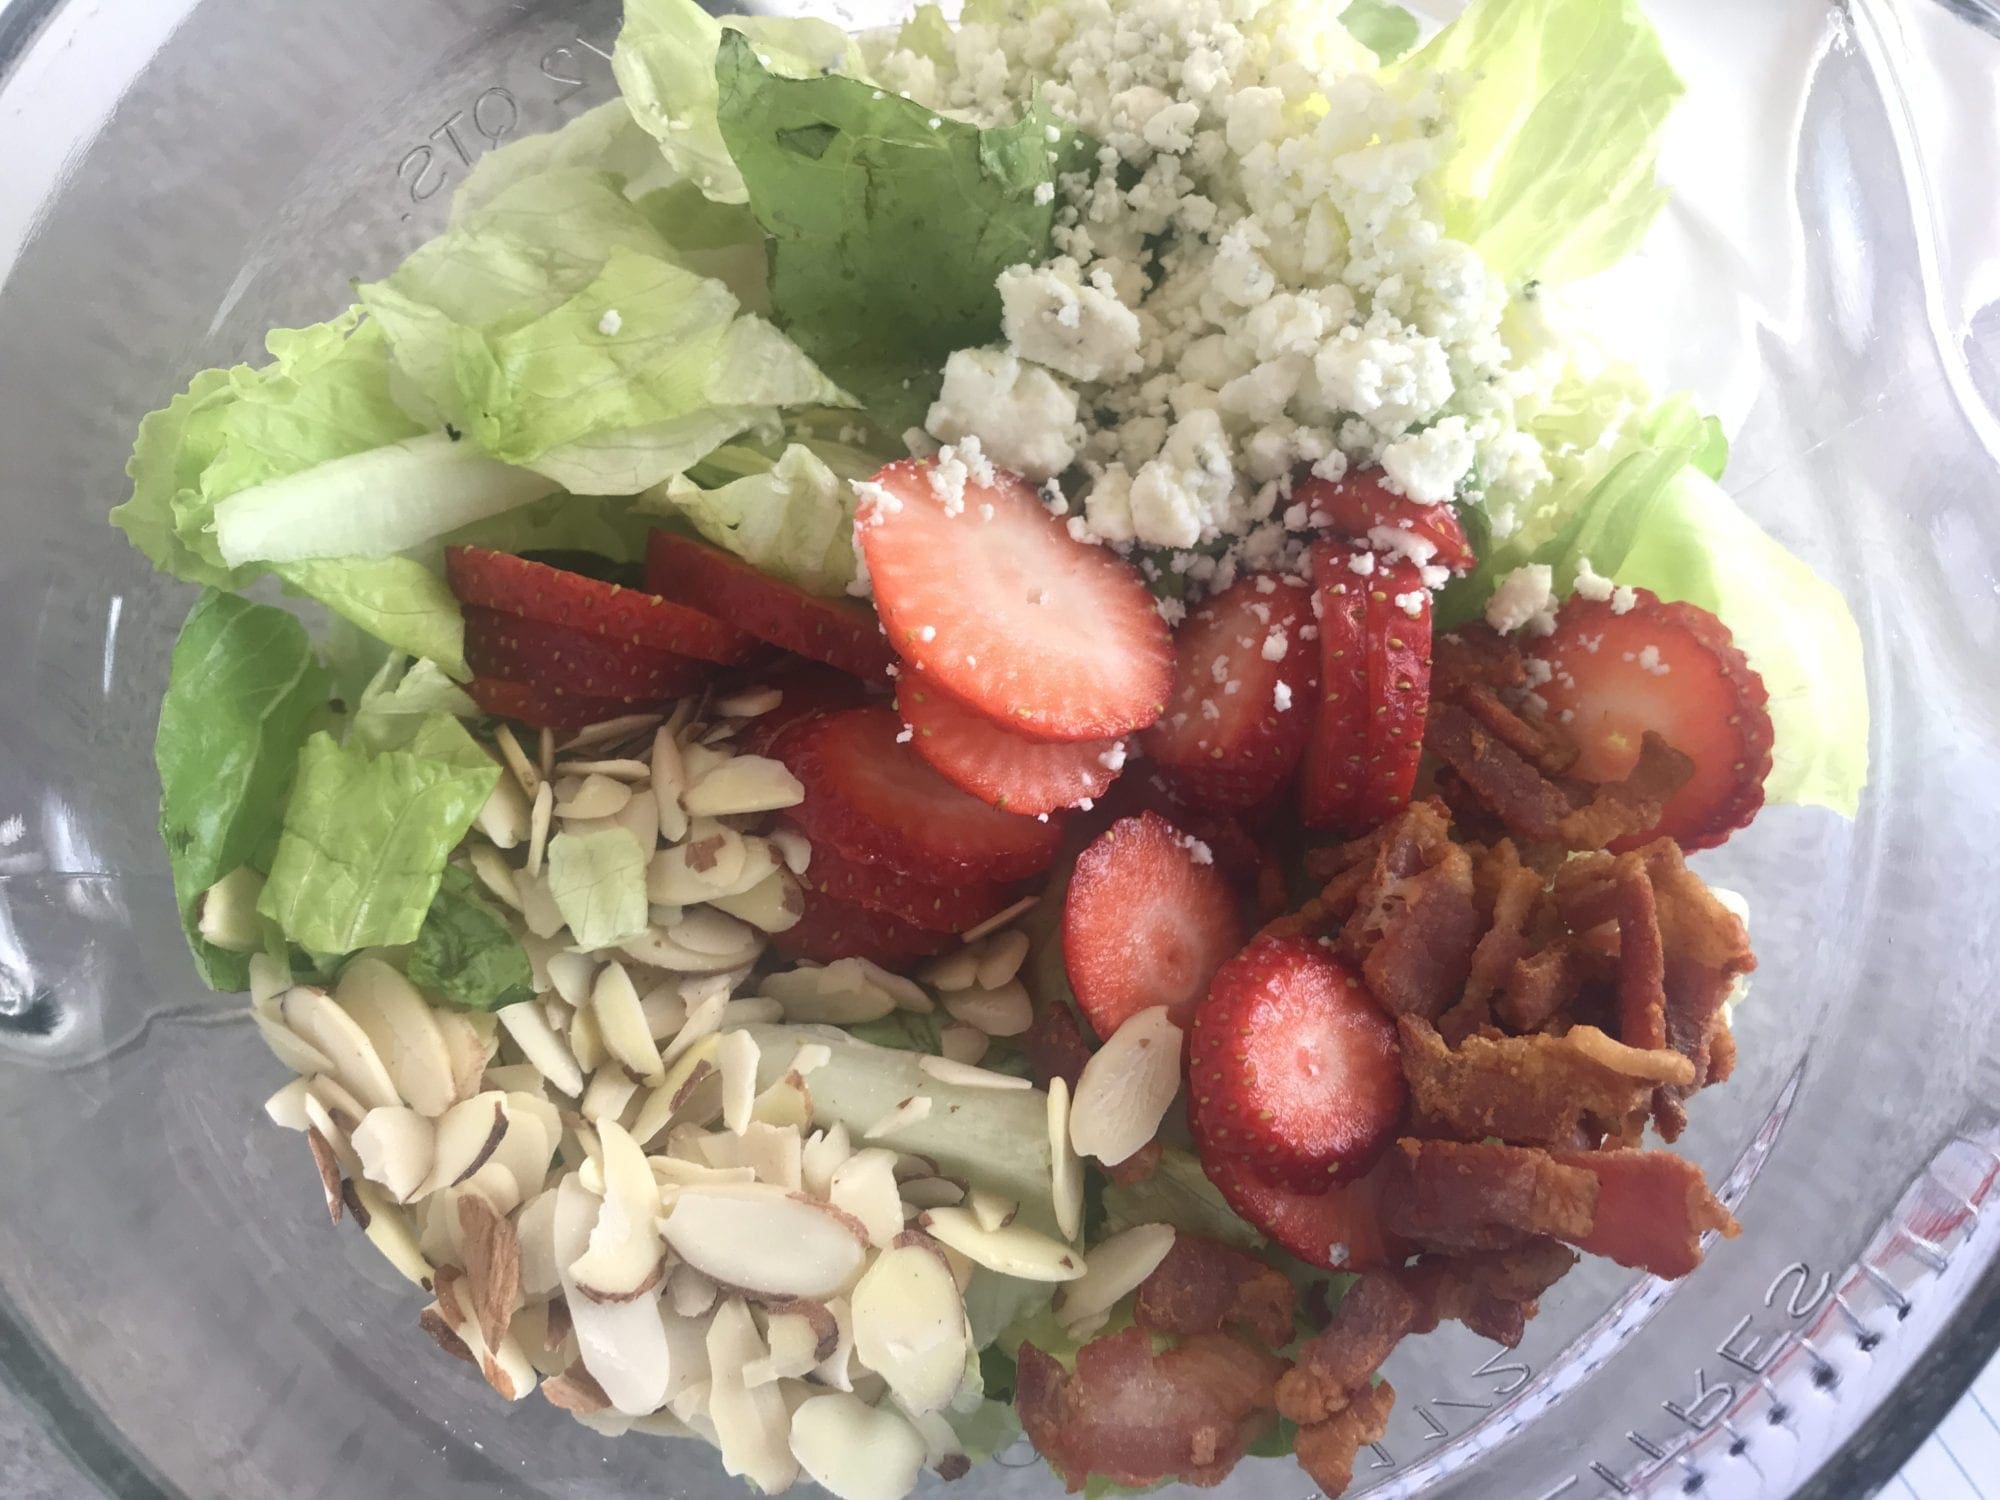 One simple step to make this delicious Red, White, and Bleu salad.